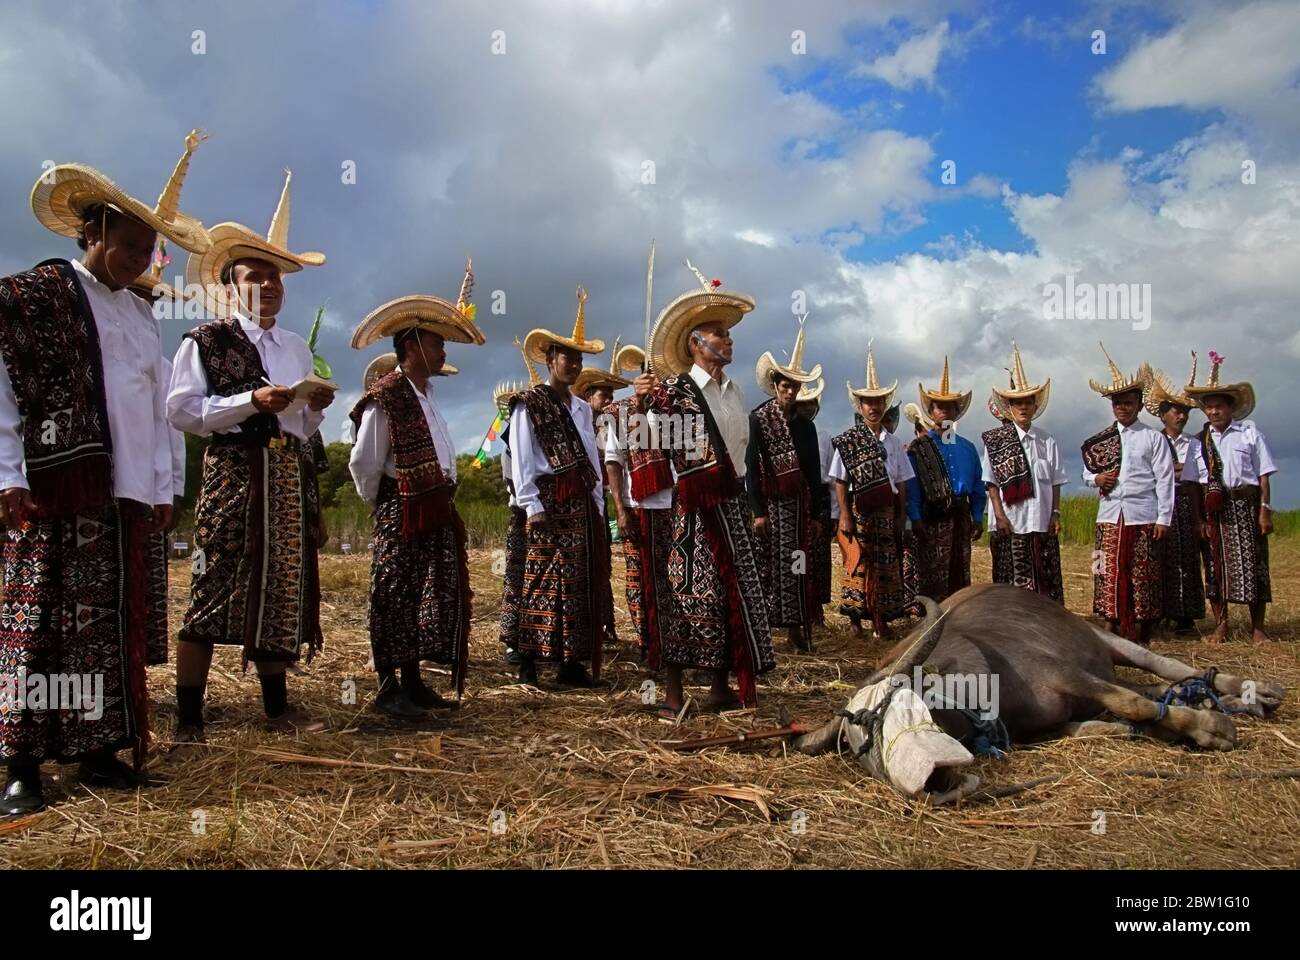 Elders of traditional communities doing rehearsal, a preparation before an actual buffalo slaughtering which is an important part for a certain traditional ceremony involving traditional tribes/families in Rote Island, Indonesia. Archival photo. Stock Photo